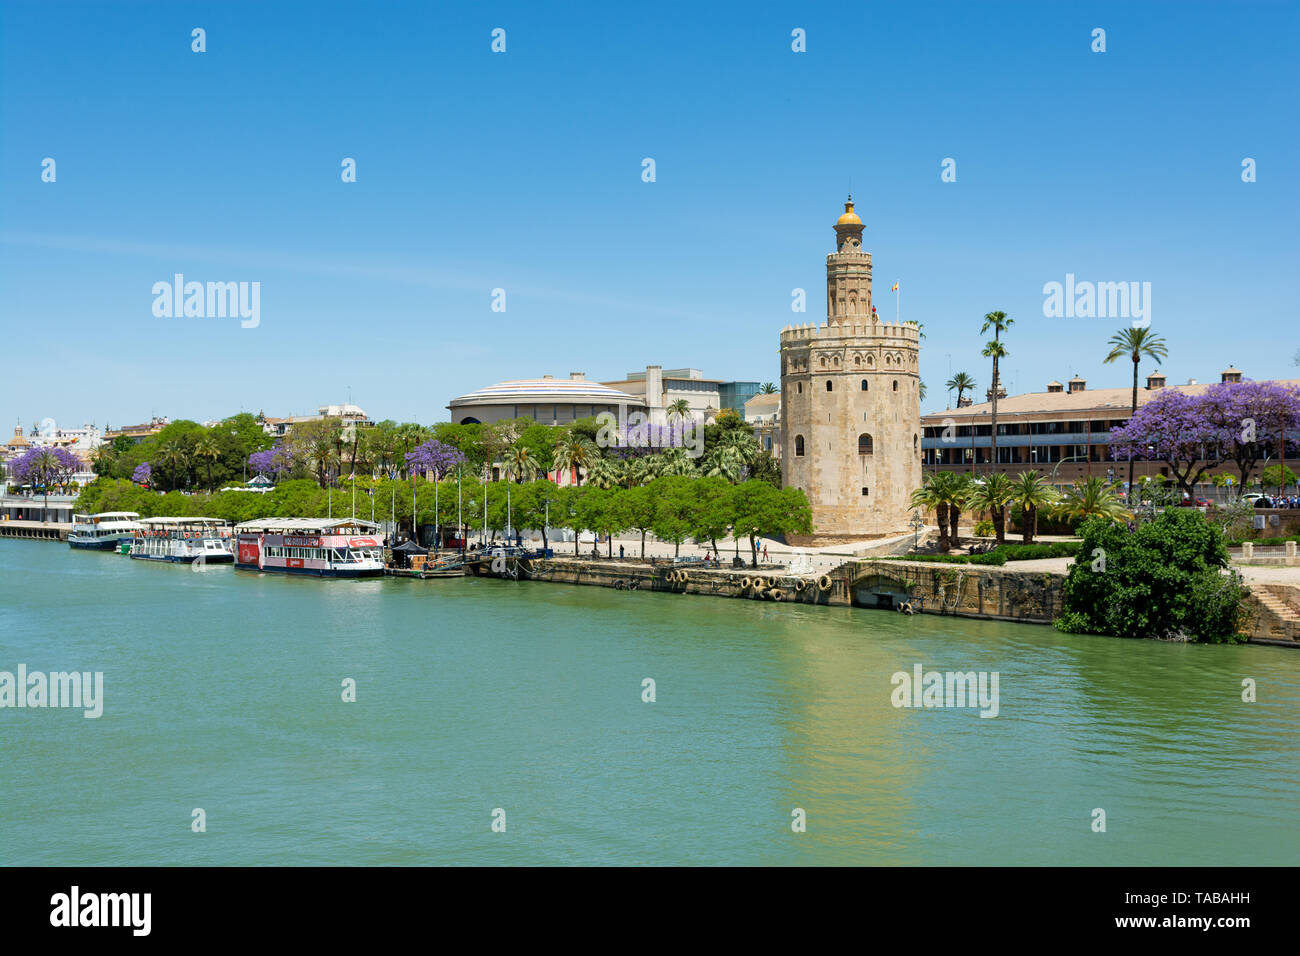 The tower of the Torre del Oro Naval Museum, Seville, Andalusia region, Spain Stock Photo